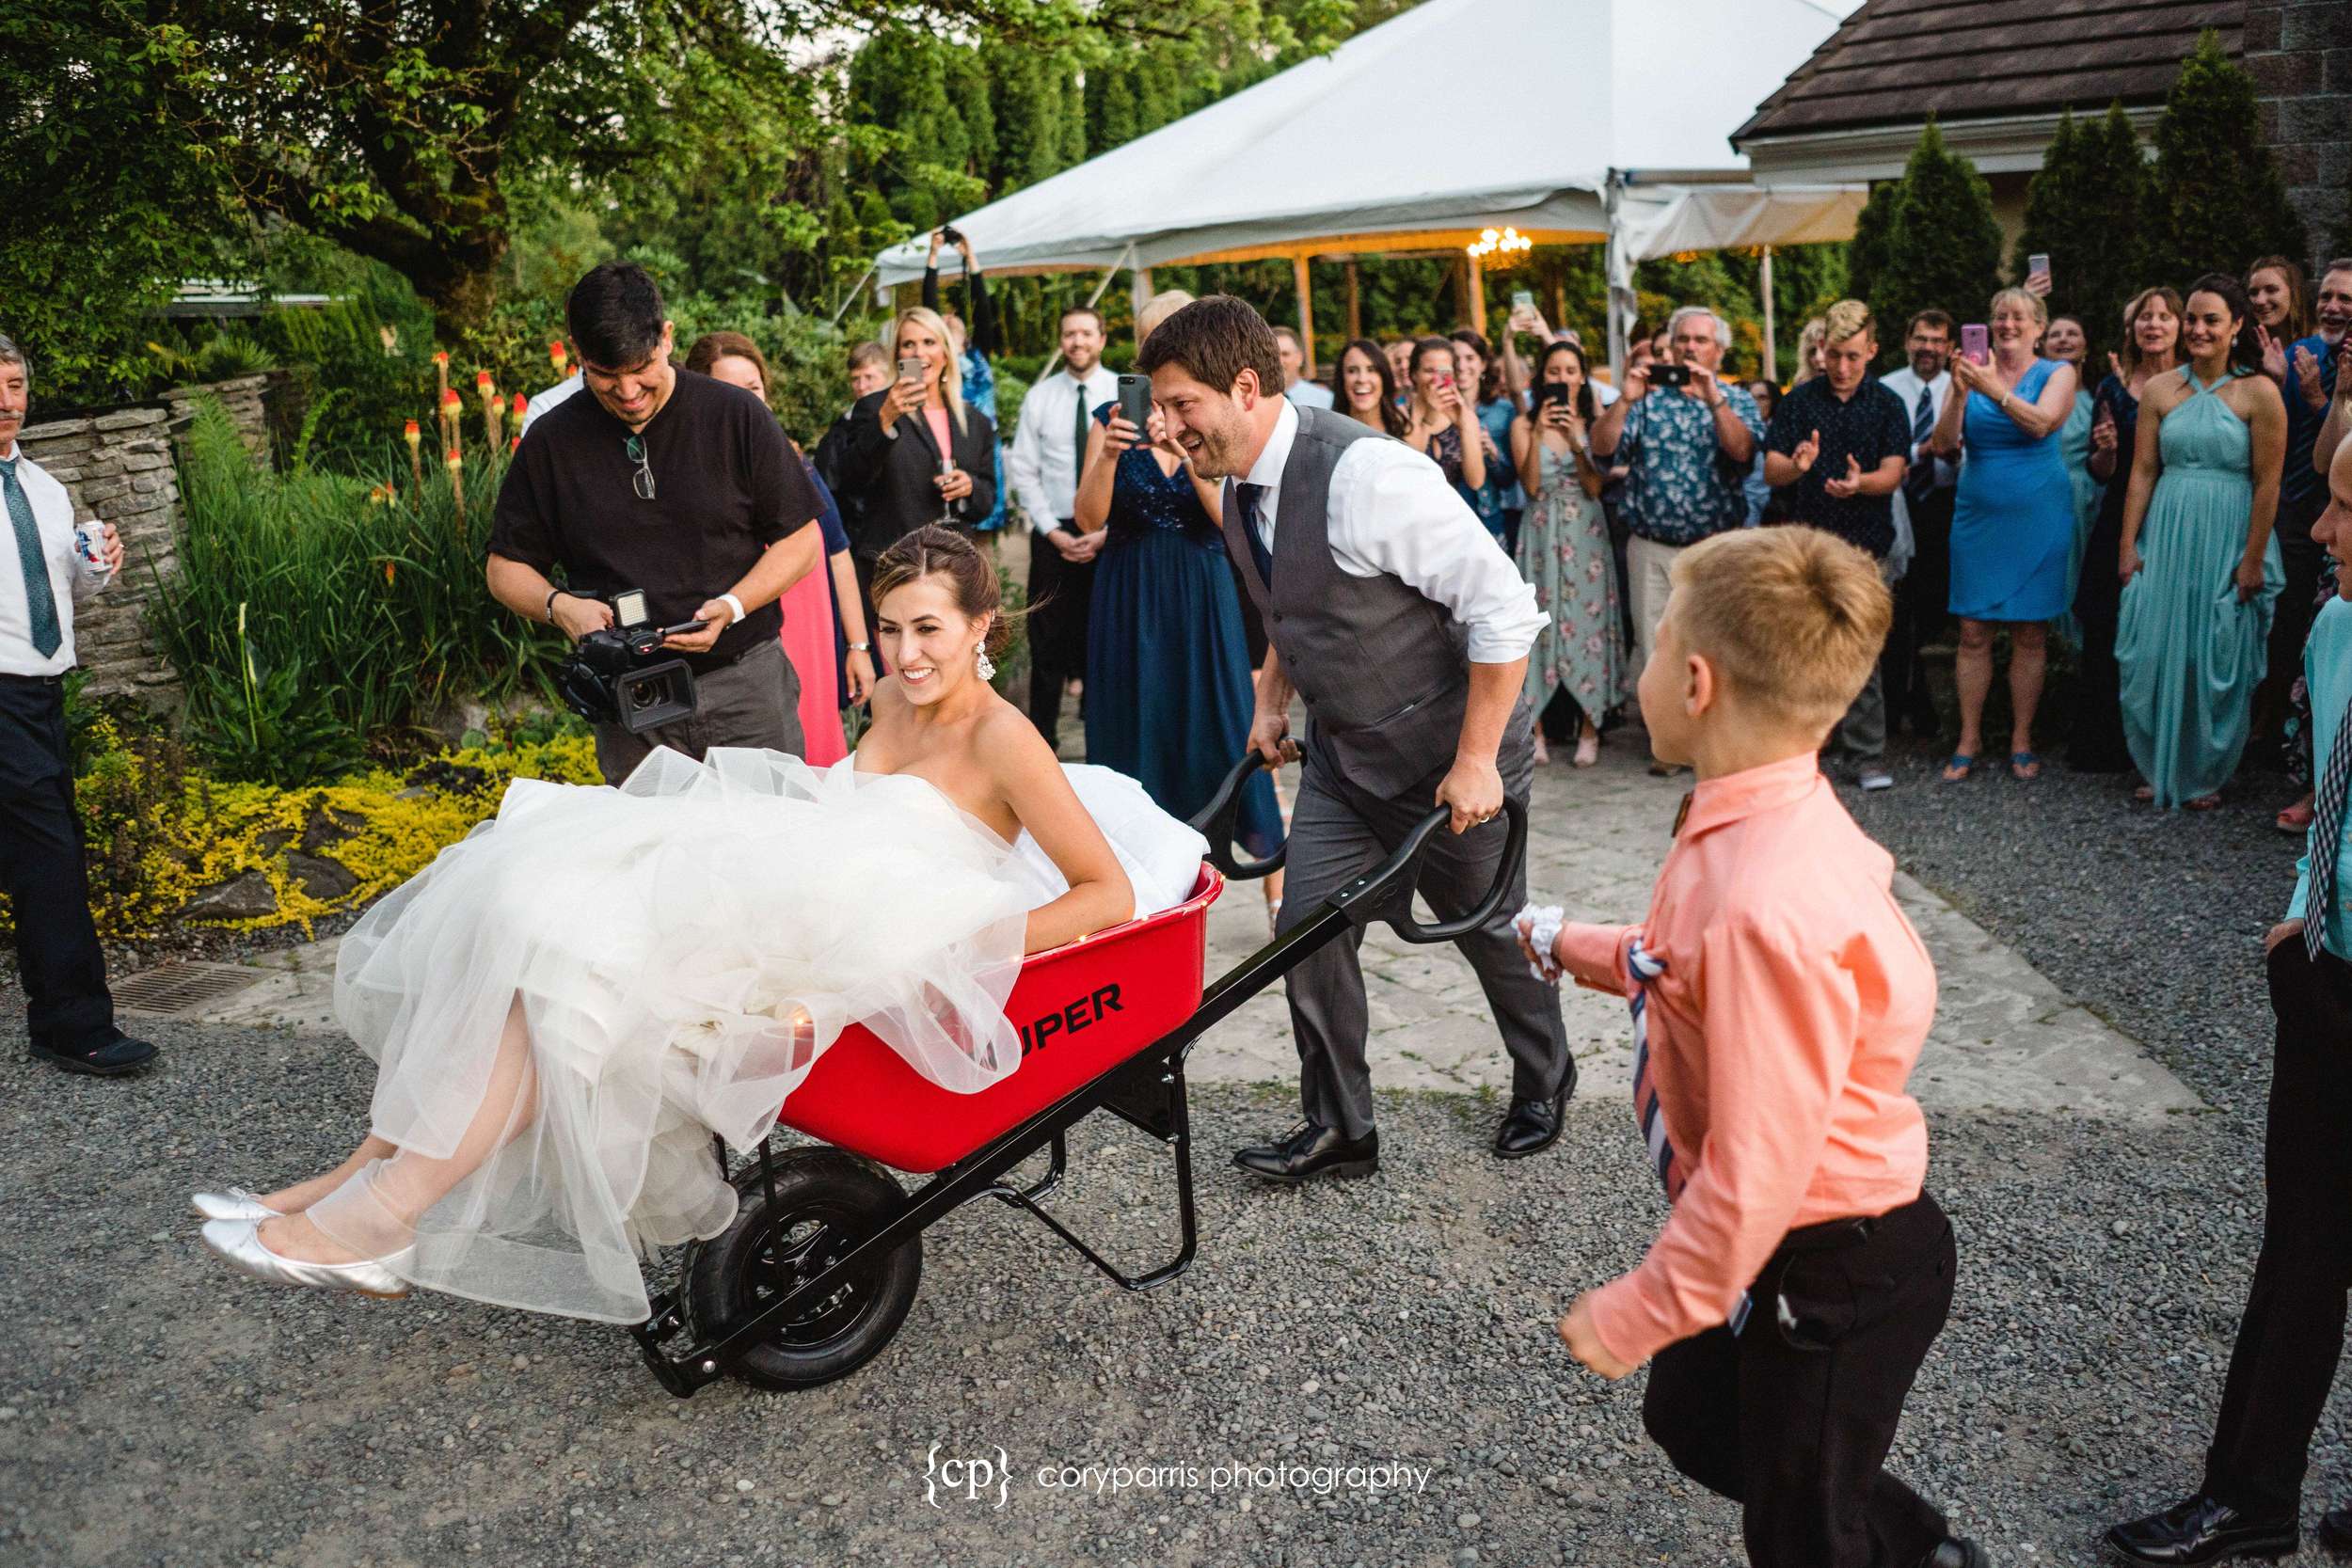 Bride in a wheelbarrow. Evidently a family tradition that I had not heard of before this wedding!